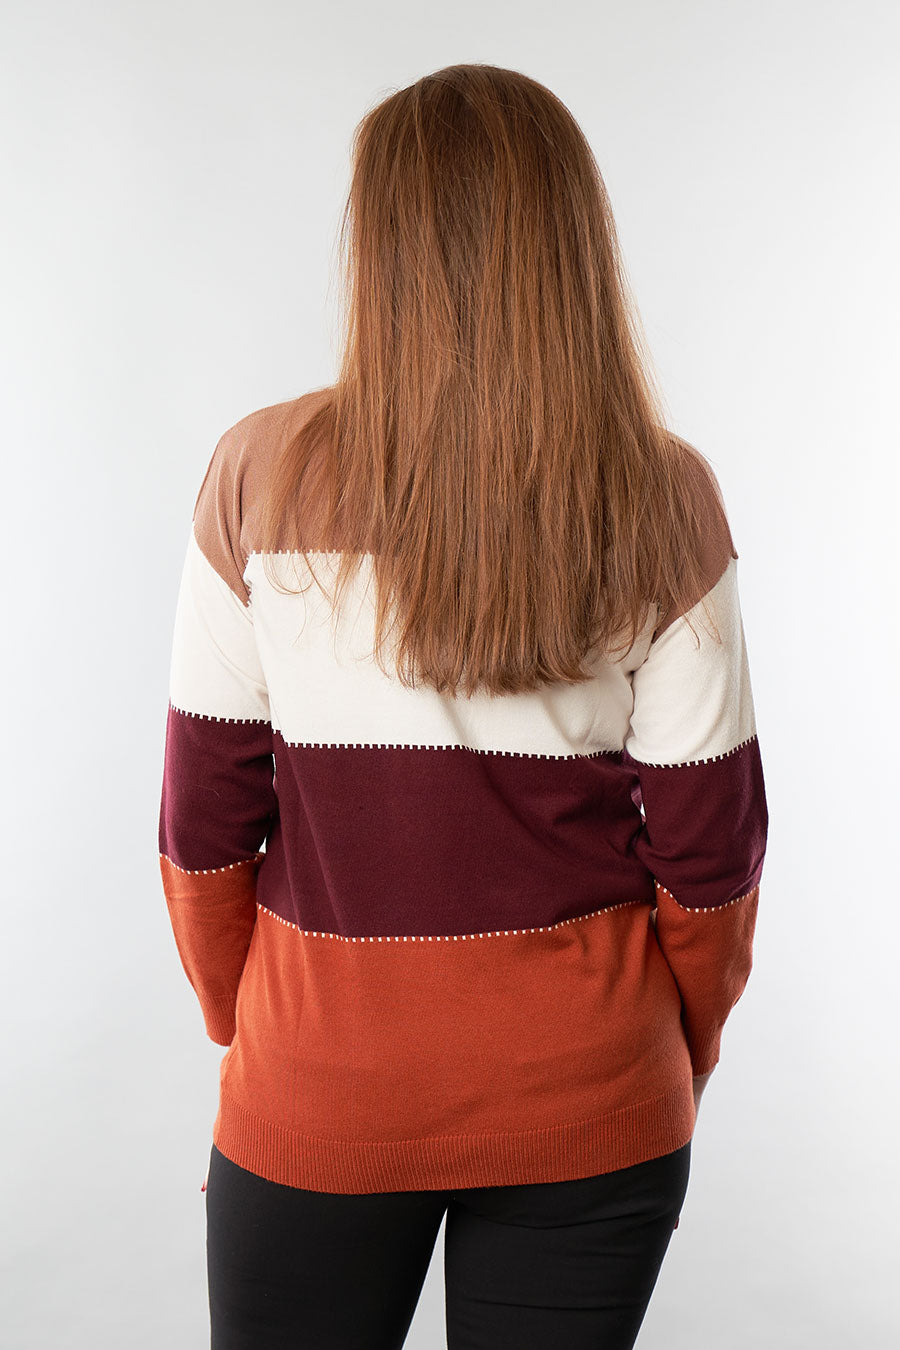 Fully Capable Long Sleeve Top Back